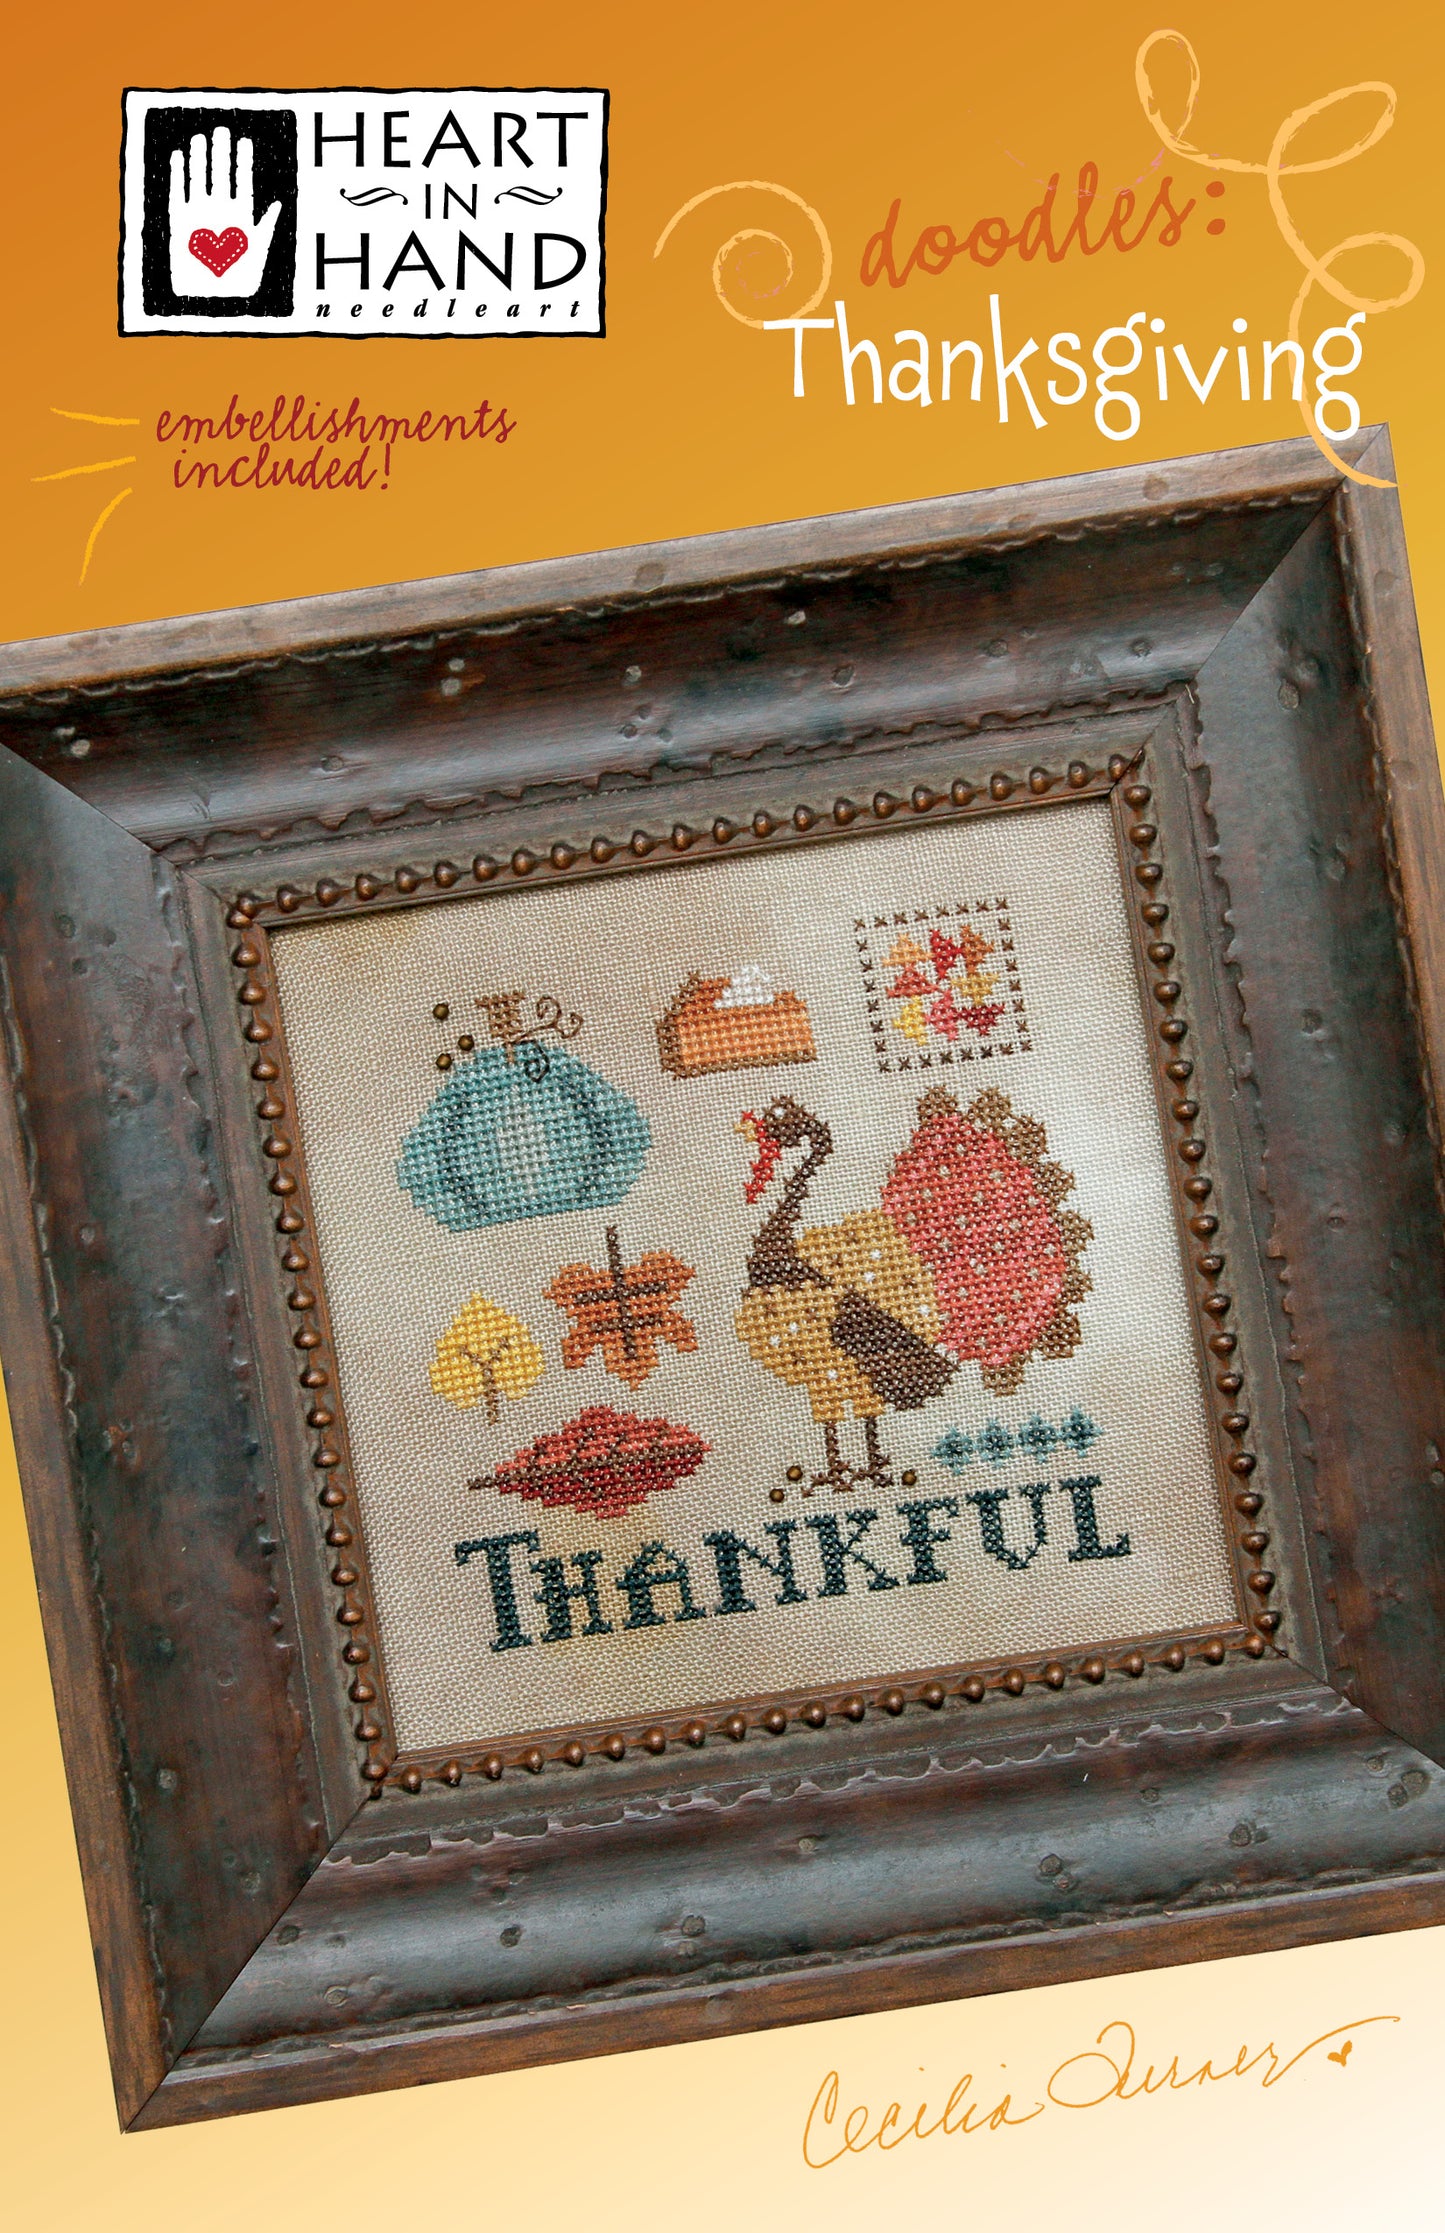 PREORDER Doodles: Thanksgiving Heart in Hand Cross Stitch Pattern